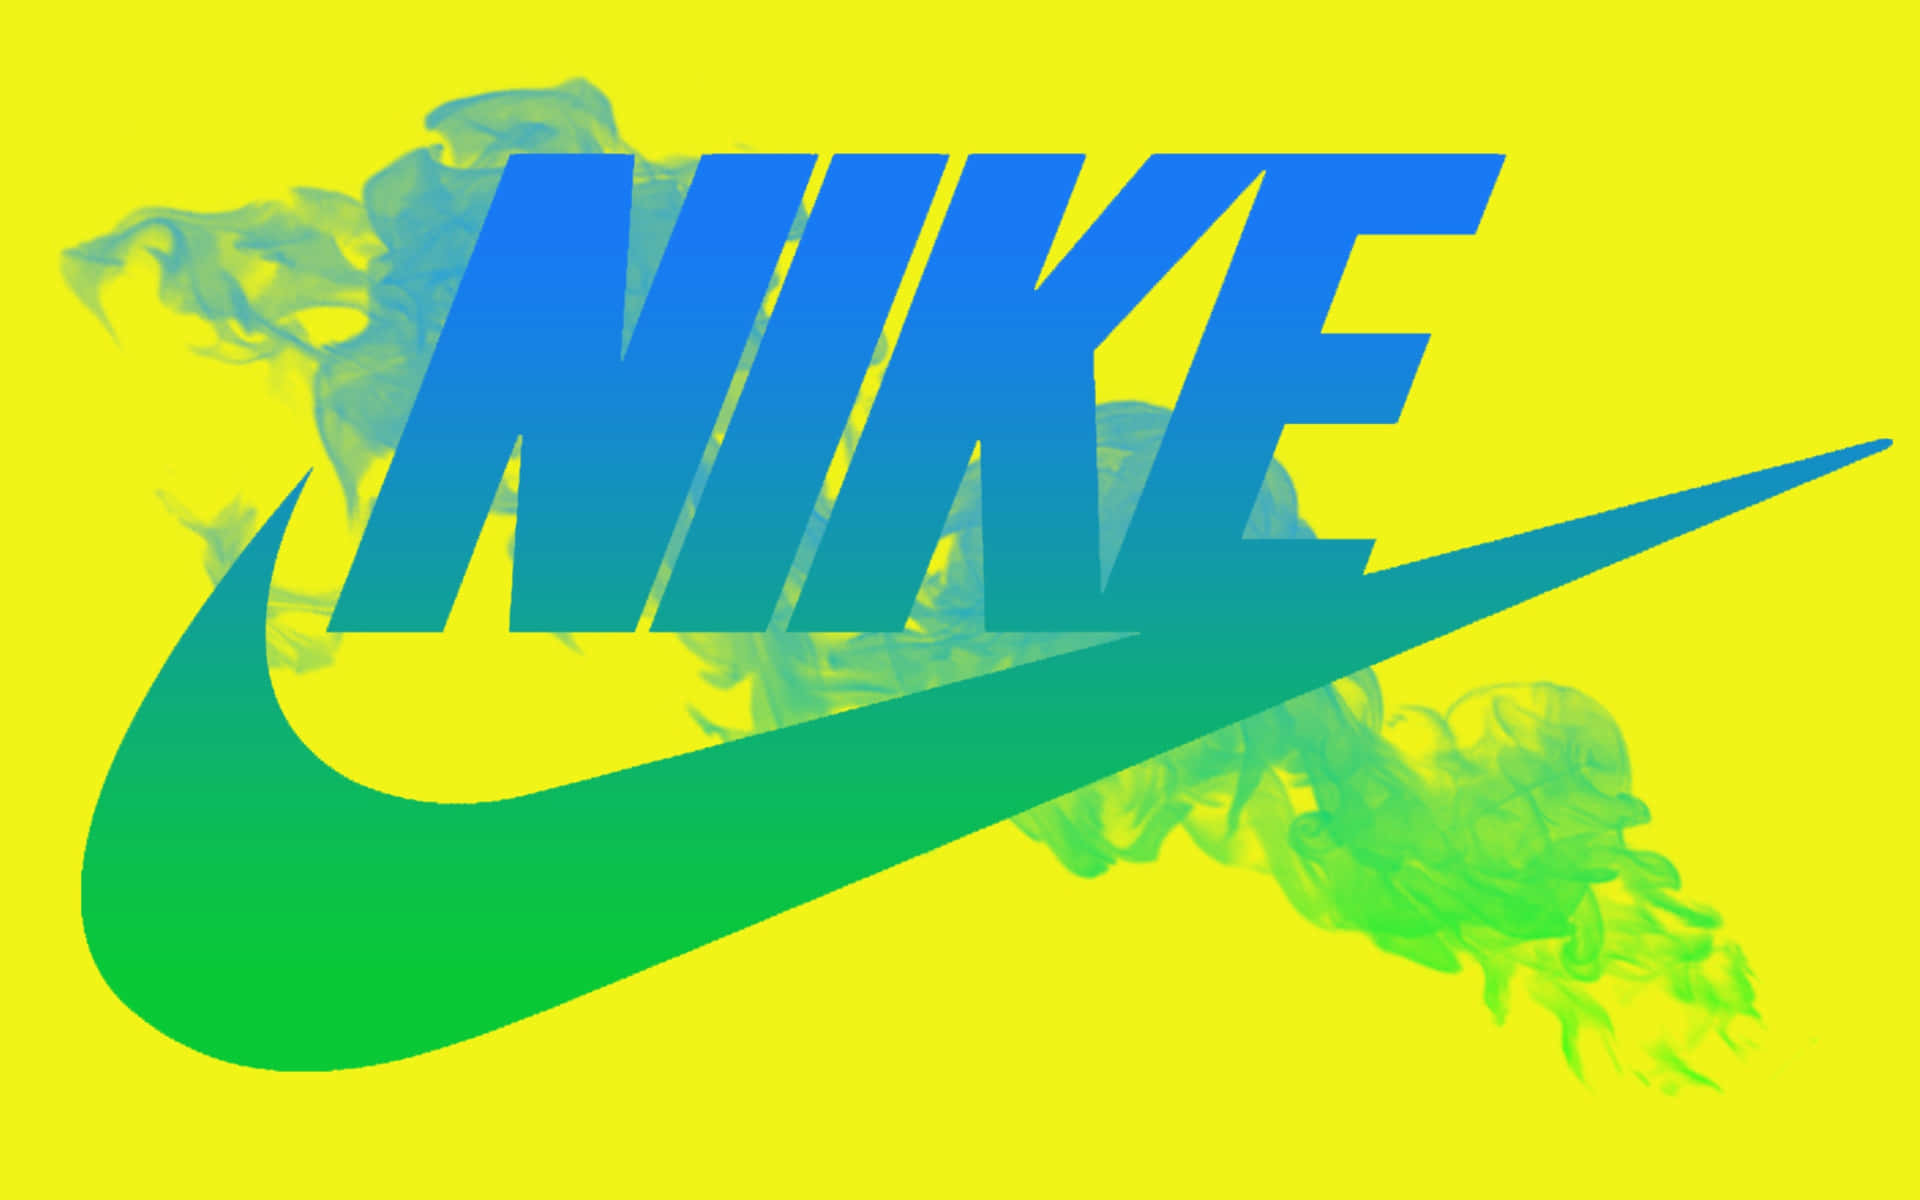 Stylish Blue Nike Sneaker on Abstract Background Wallpaper